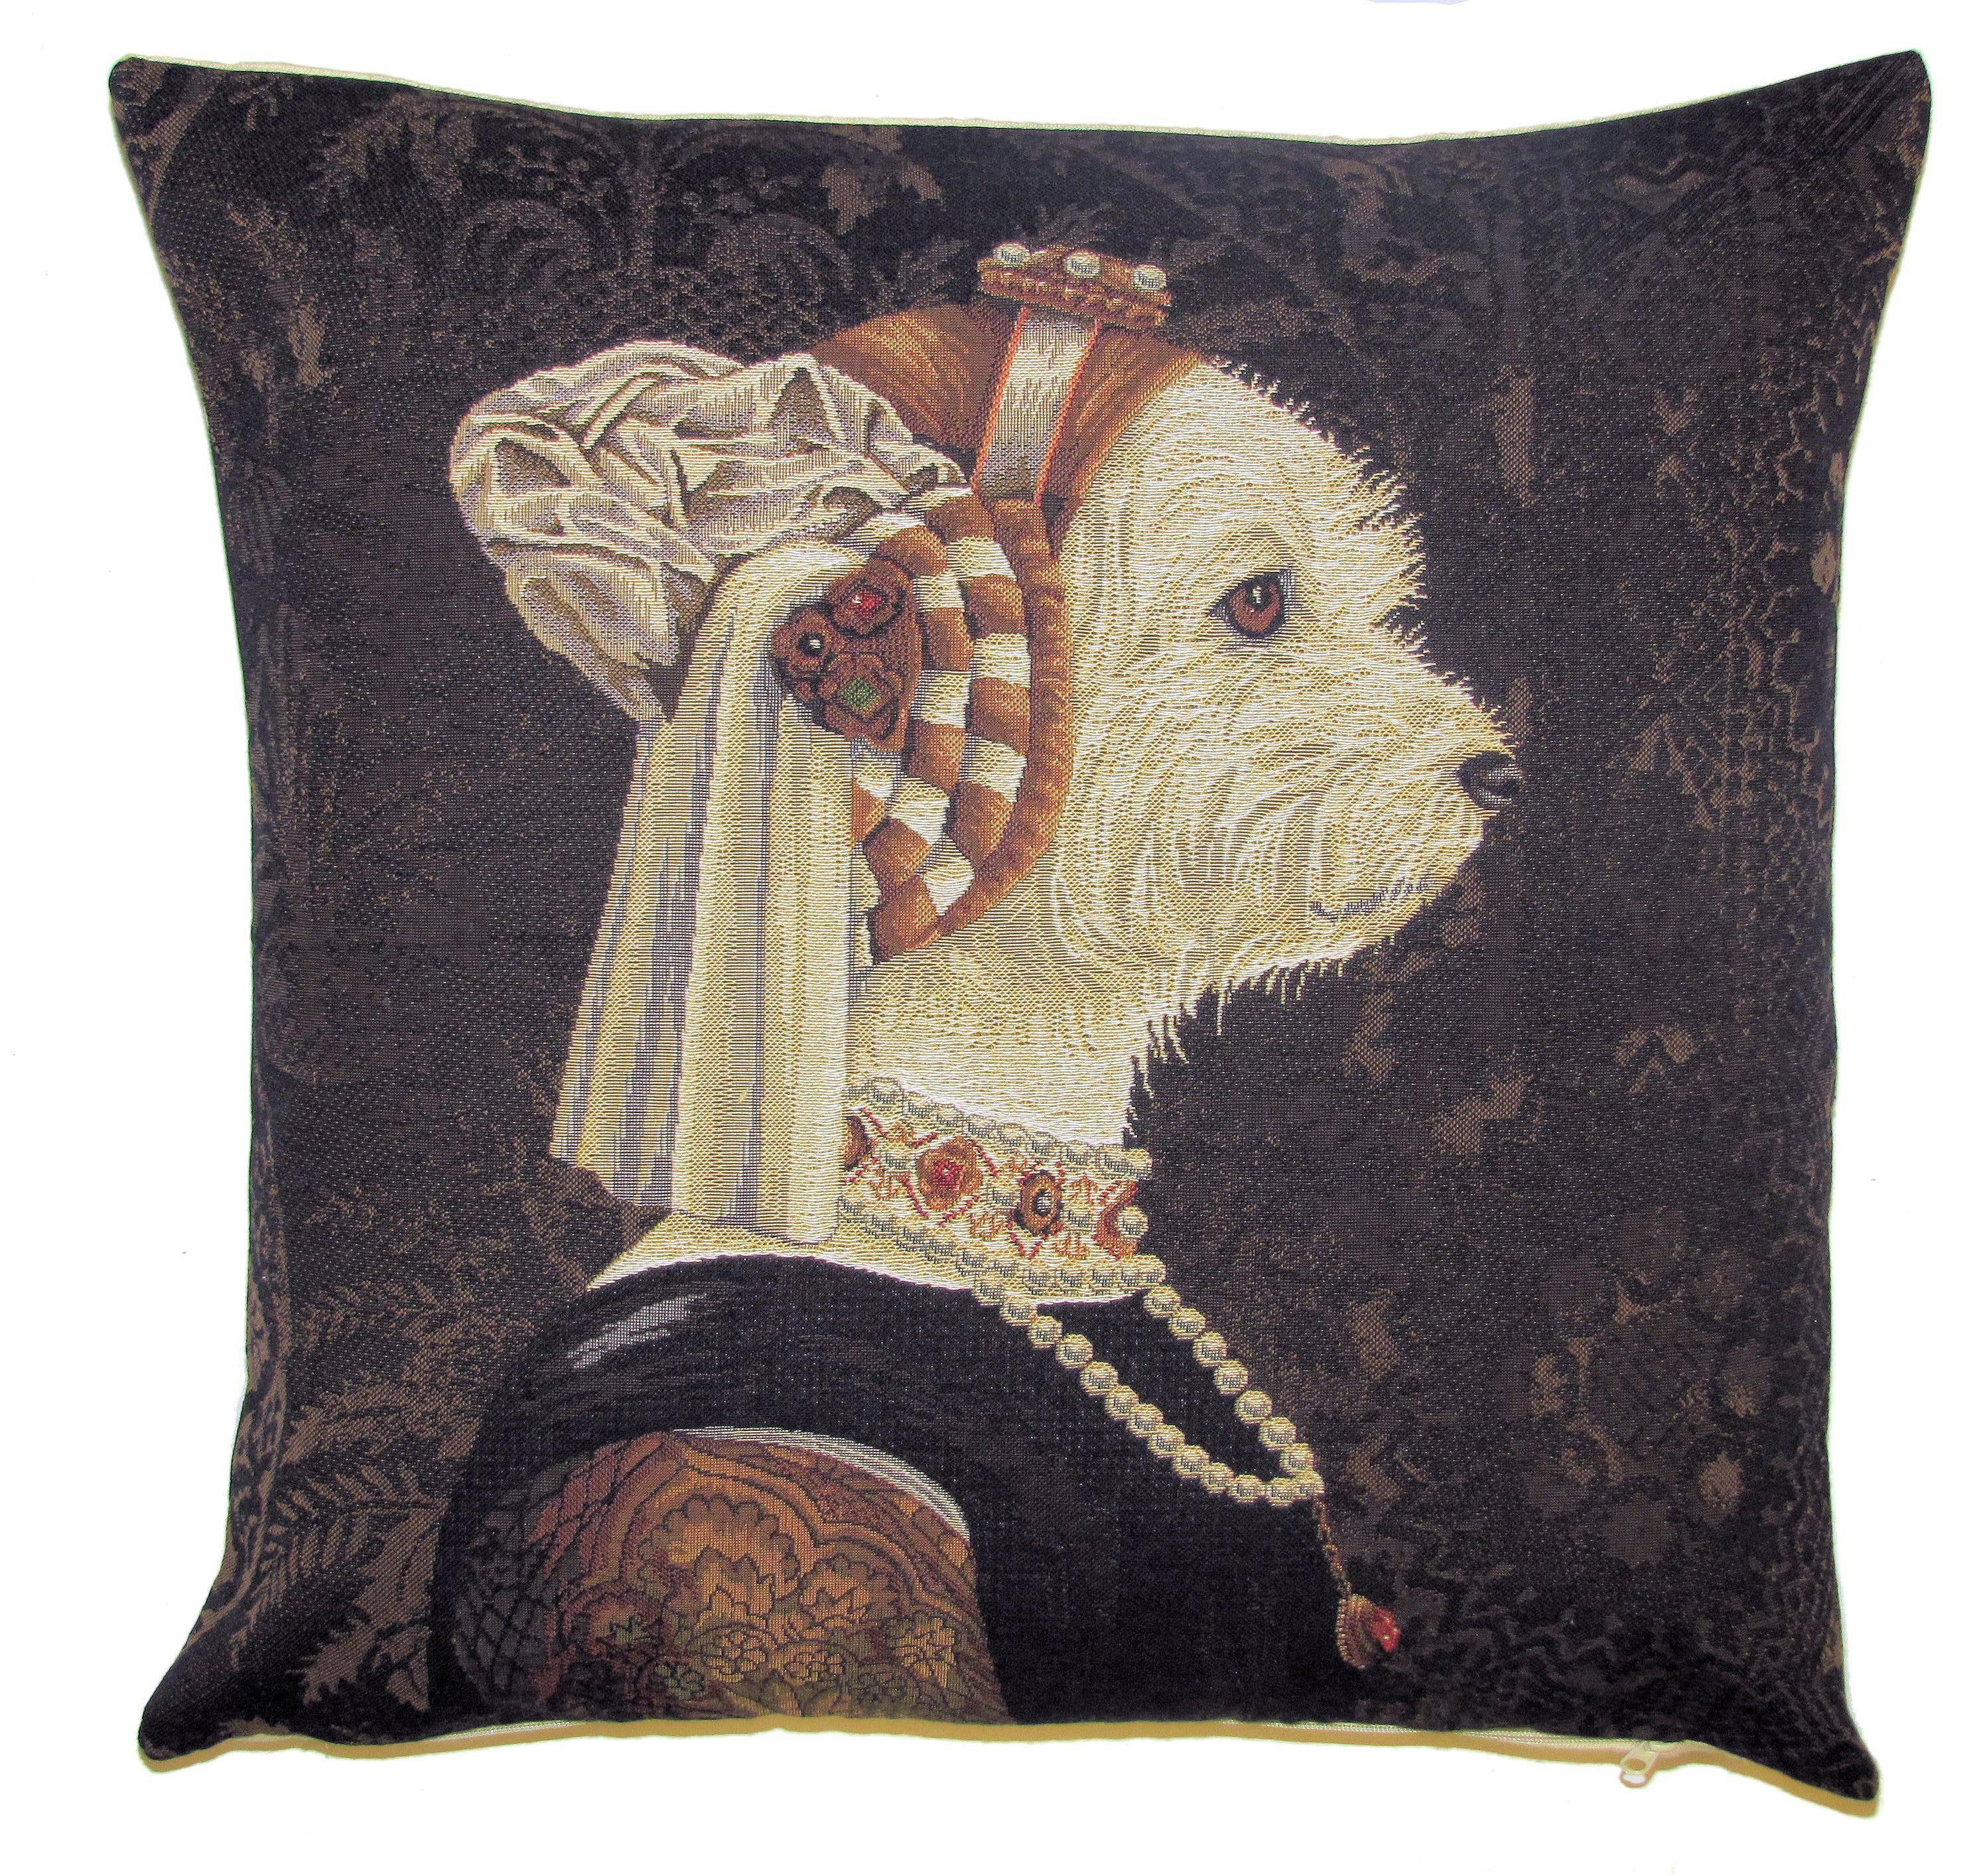 14"x14" Westy Dog Pillow Cover Jacquard Woven